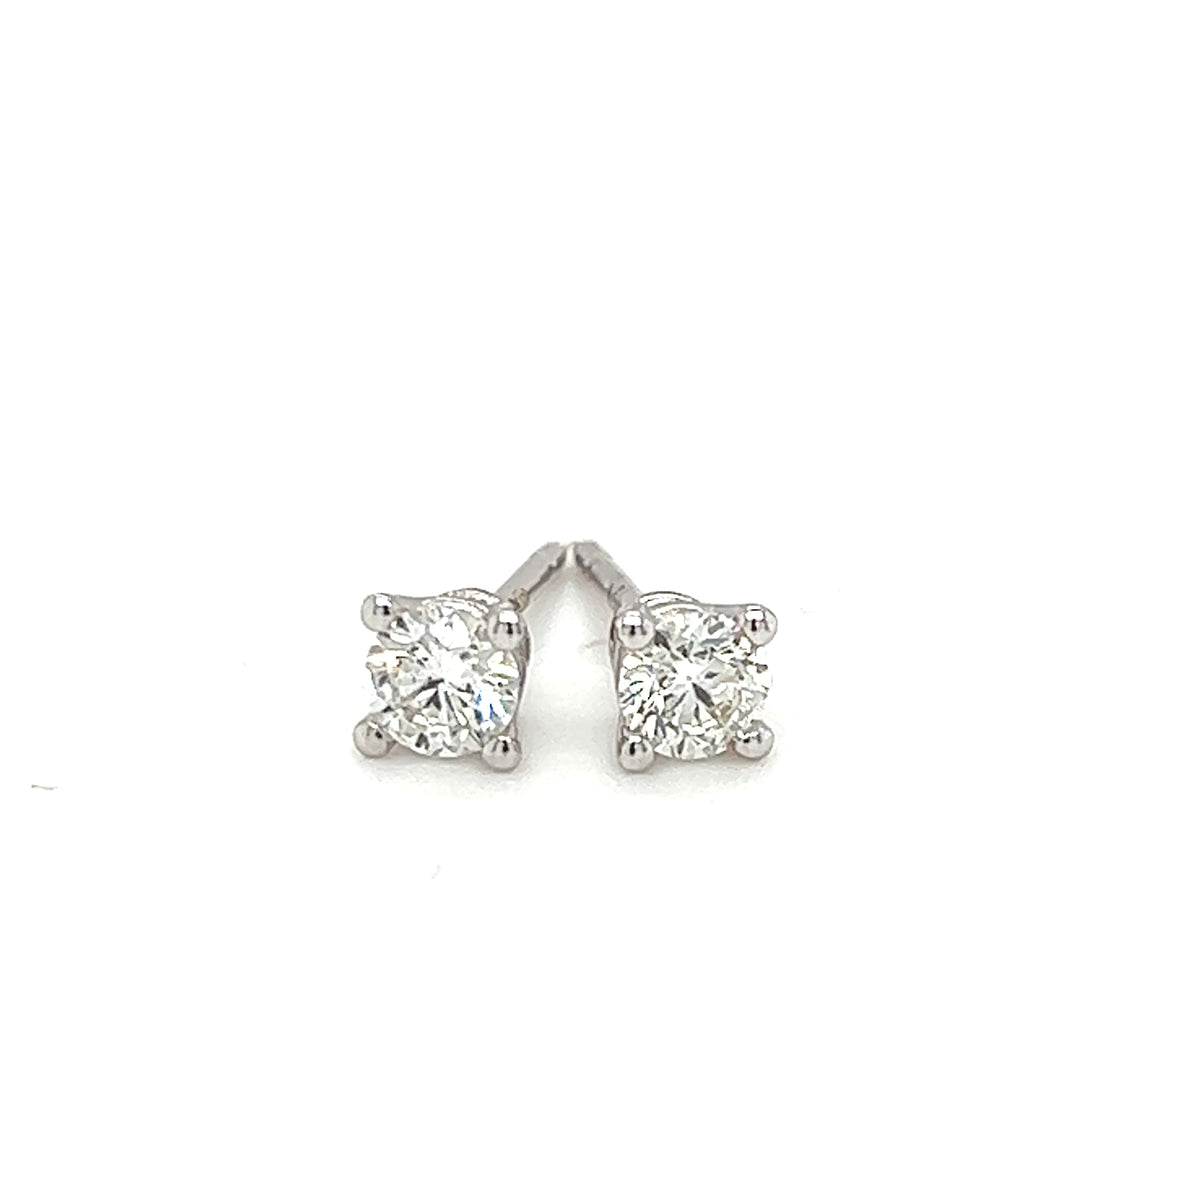 9ct white gold round brilliant cut certified diamond stud earring 0.10ct weight